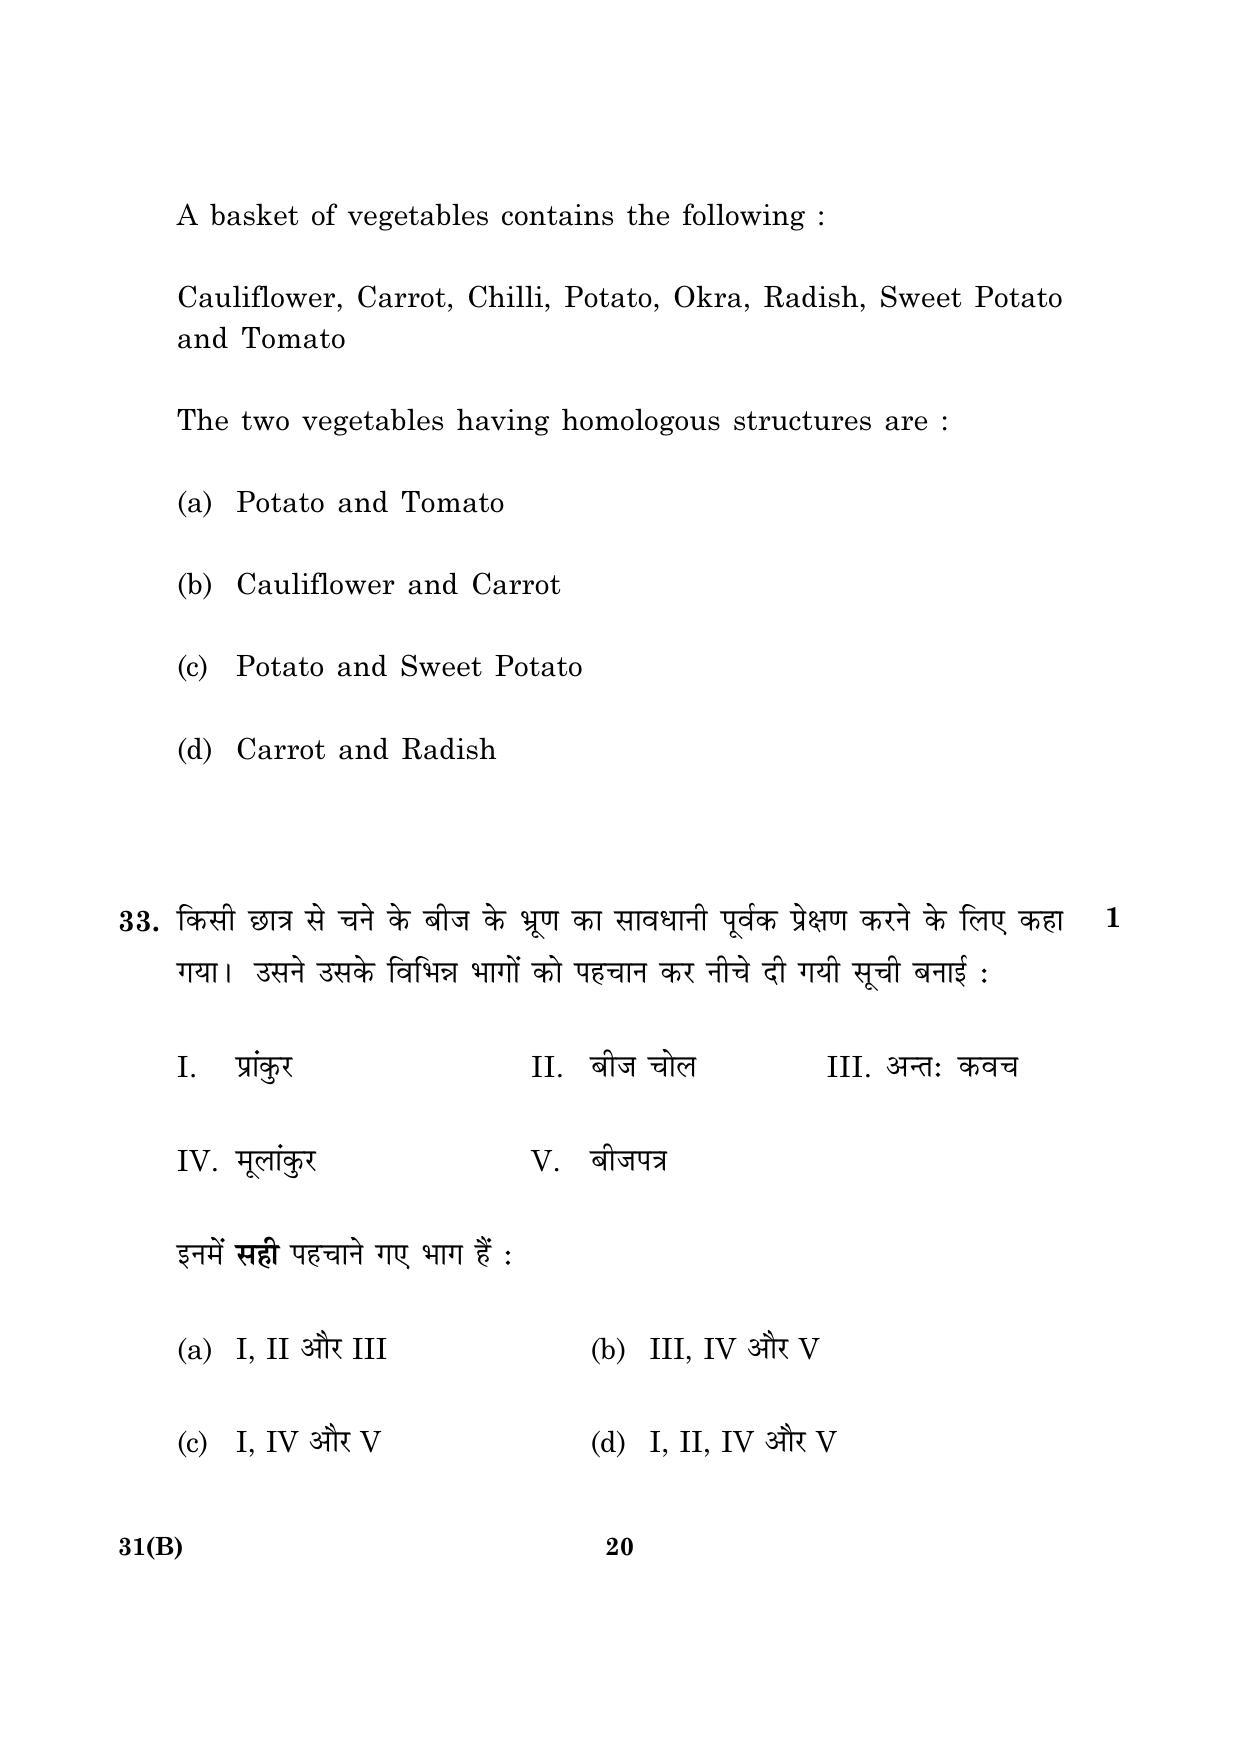 CBSE Class 10 031(B) Science 2016 Question Paper - Page 20